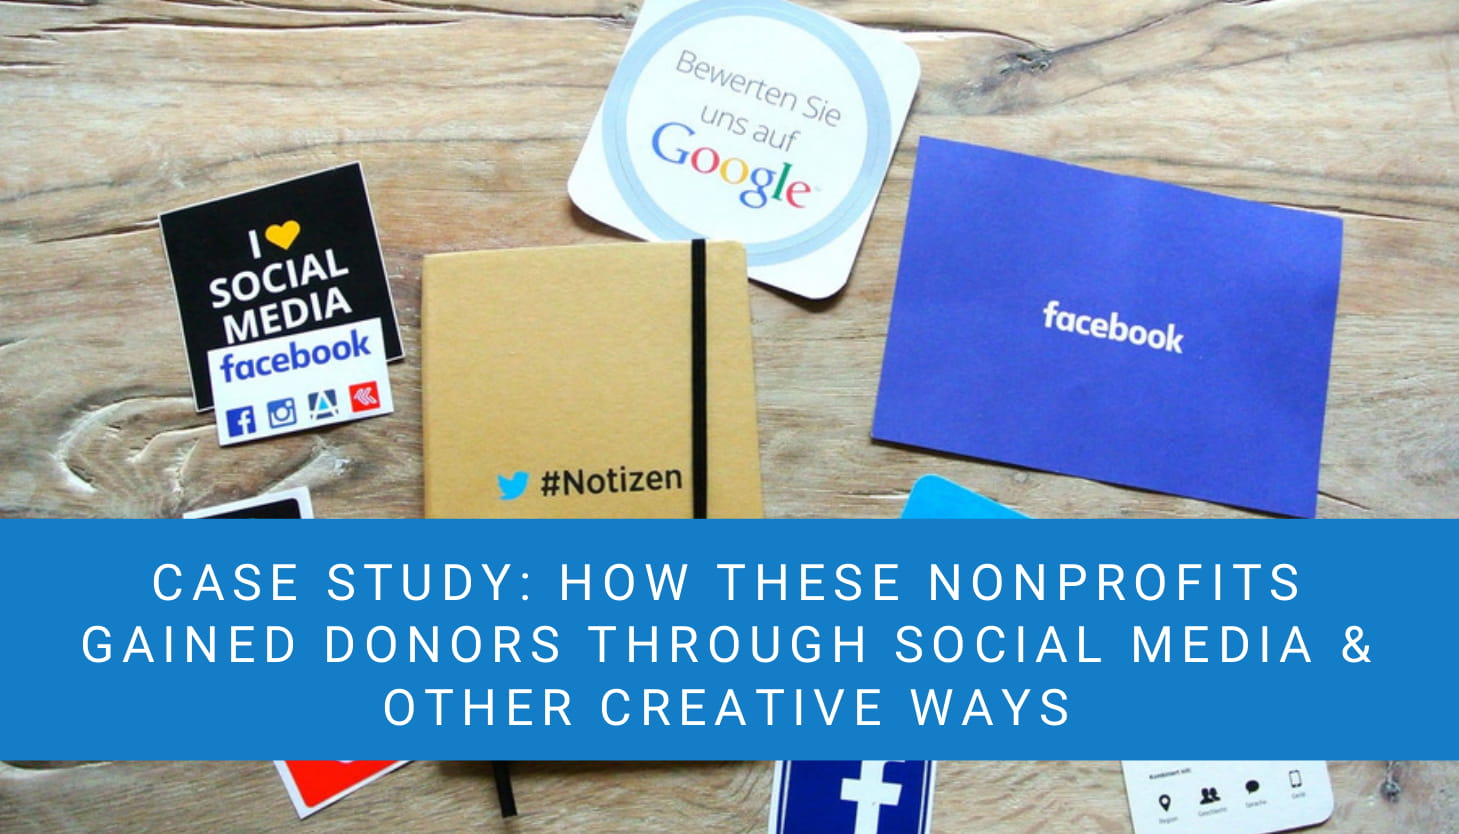 How These Nonprofits Gained Donors Through Social Media